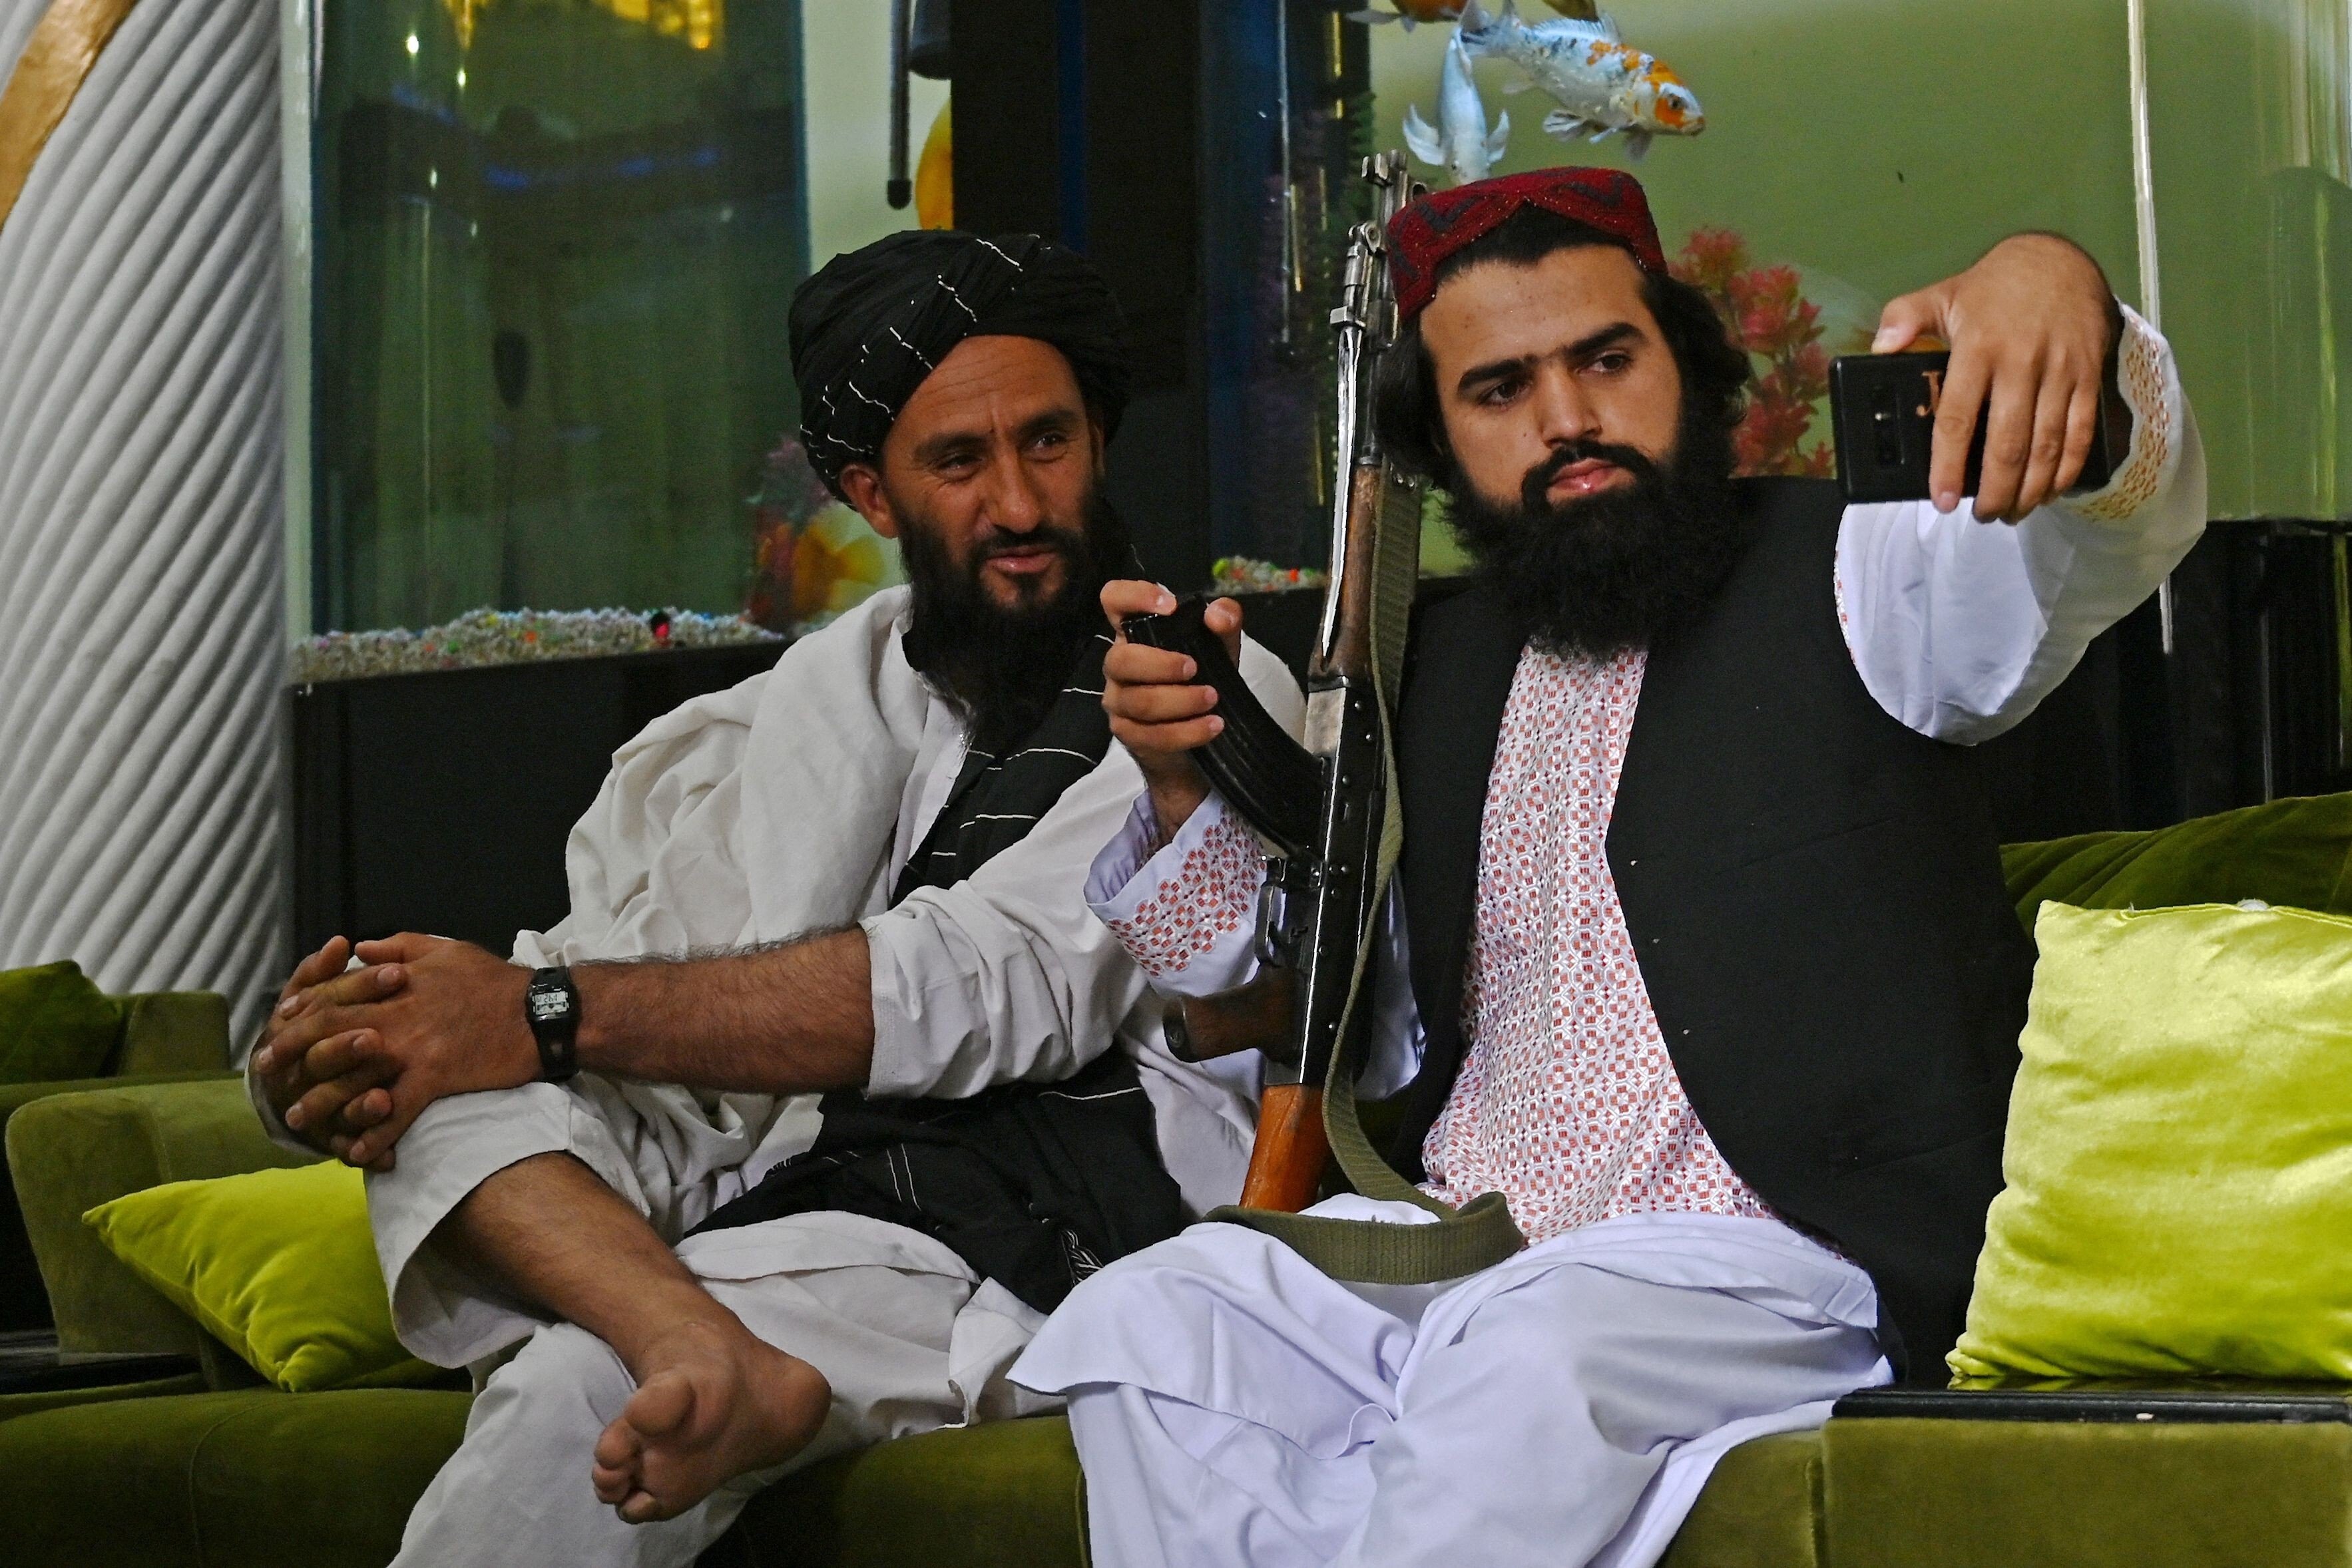 Taliban fighters take a selfie with a mobile phone after seizing the mansion of Afghan warlord Abdul Rashid Dostum. Photo: AFP